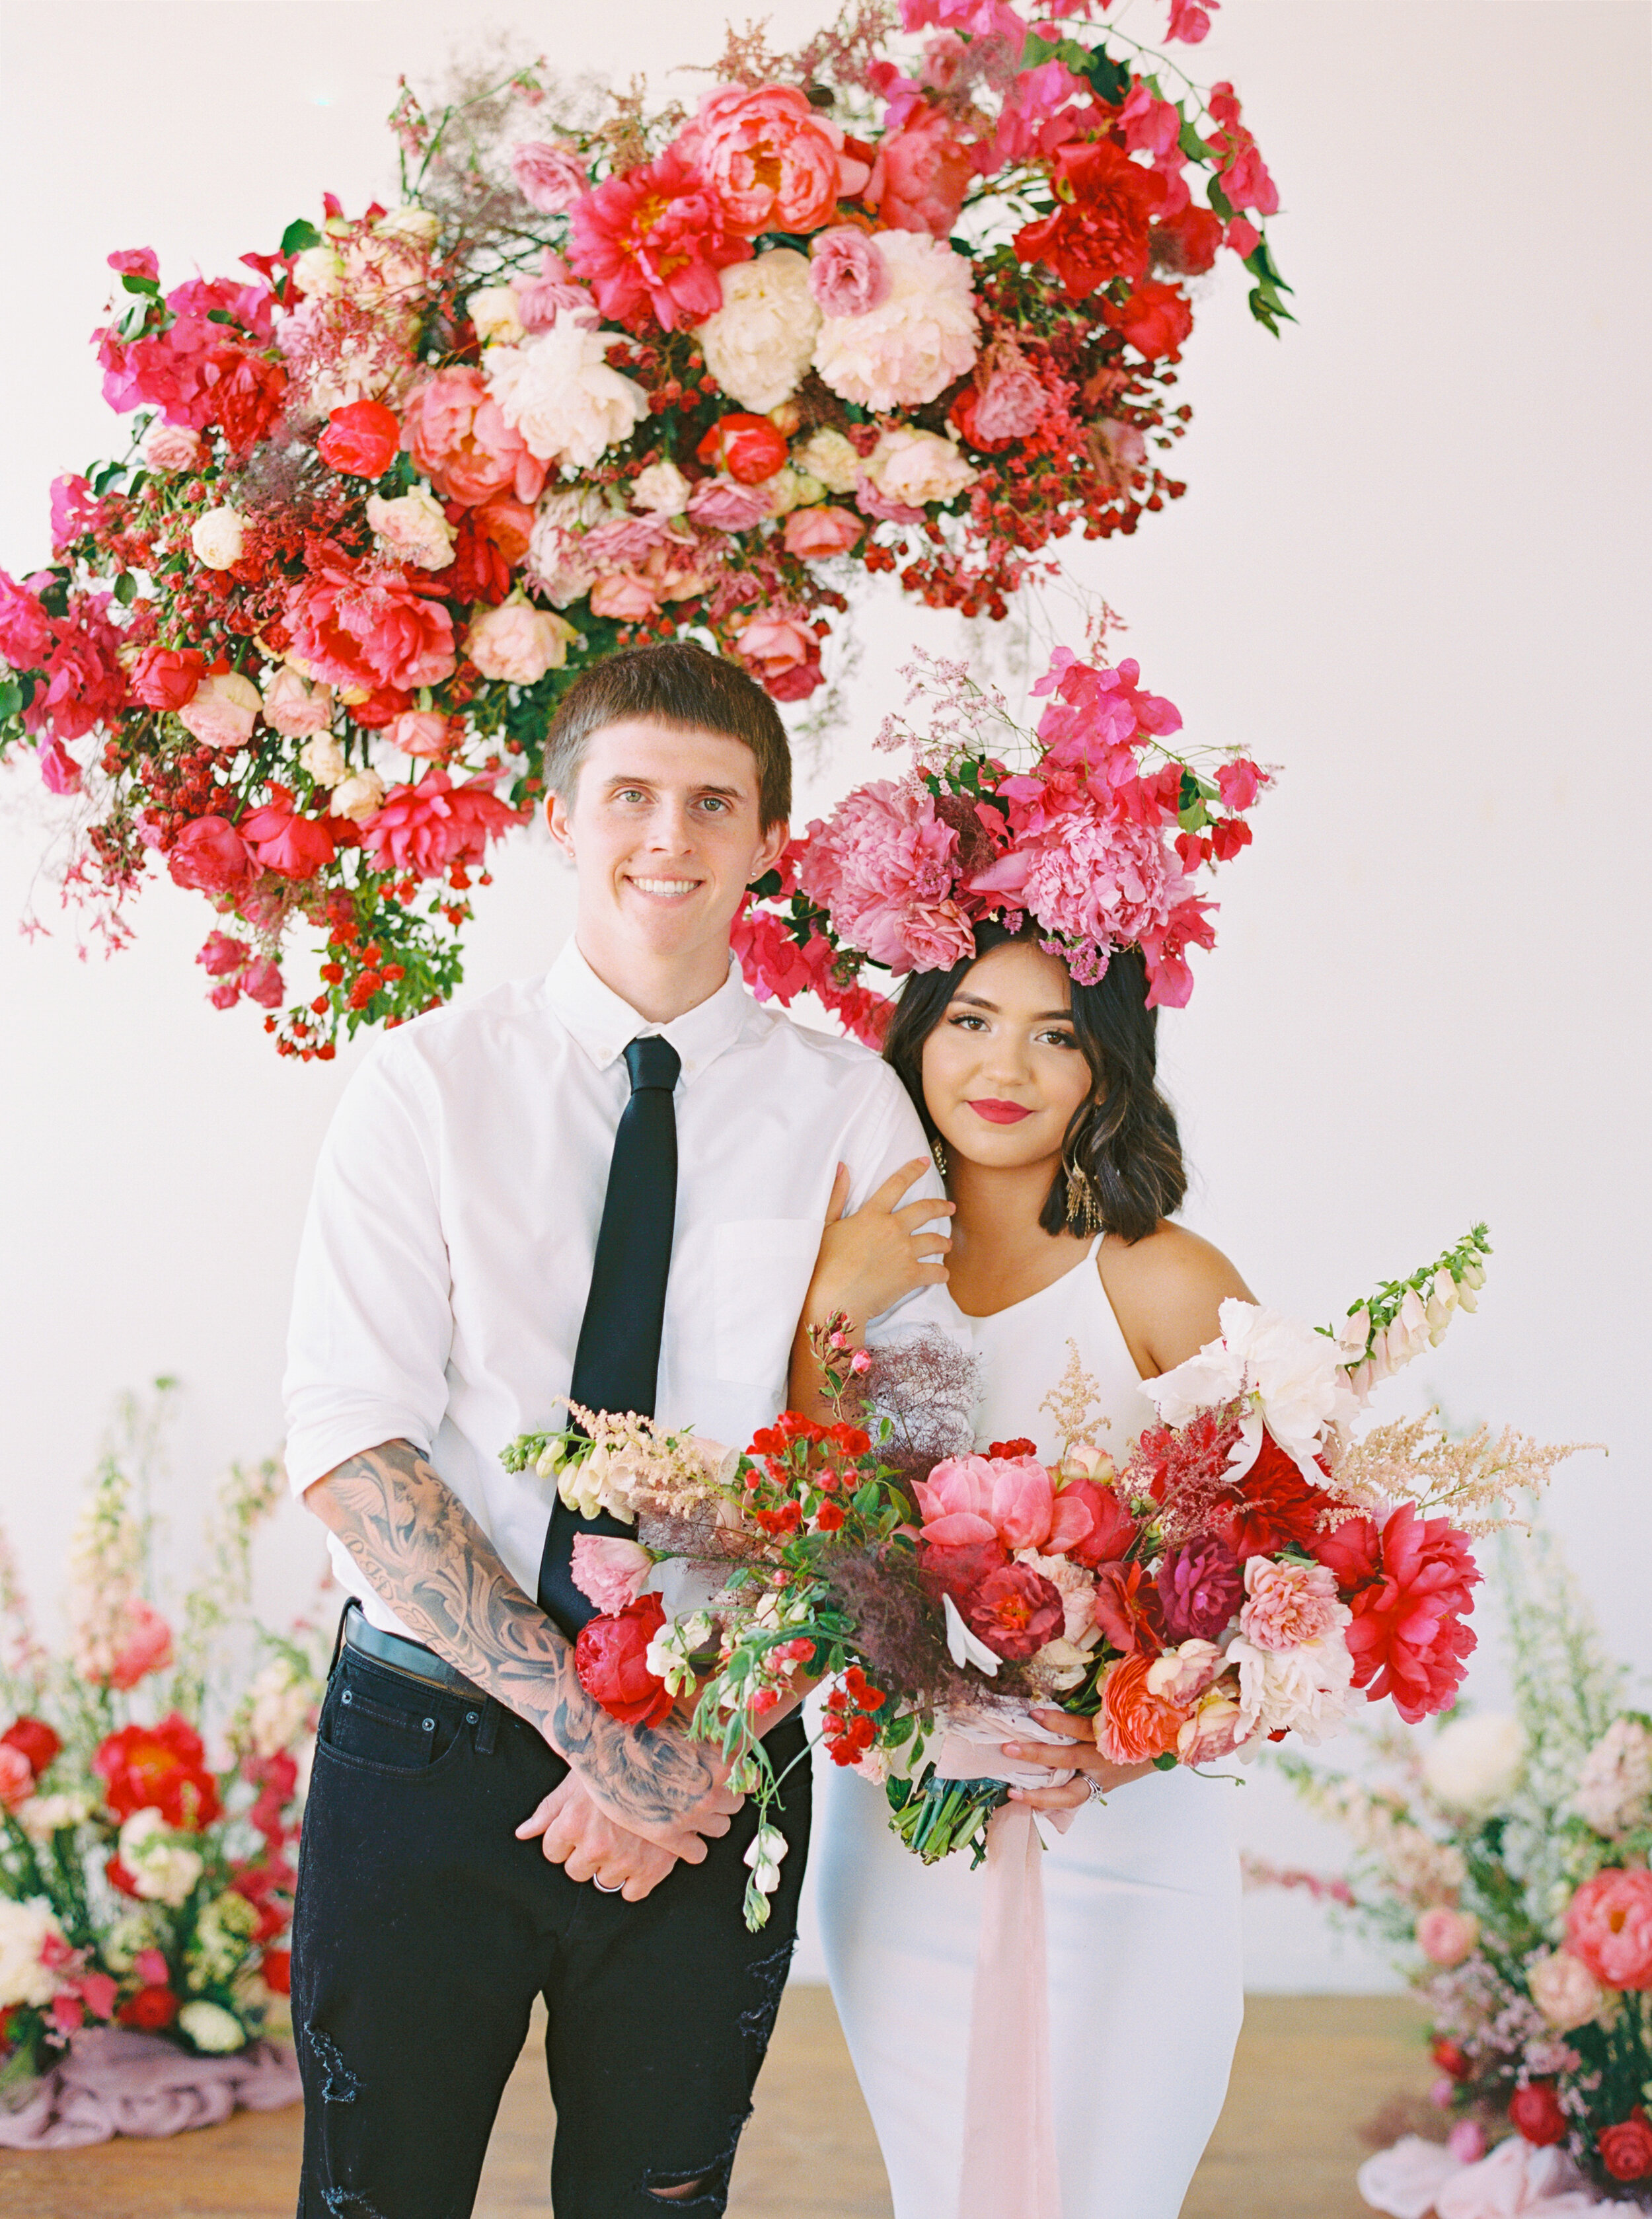 A Romantic Wedding Elopement Filled with Colorful Fuchsia - Sarahi Hadden Submission-44.jpg